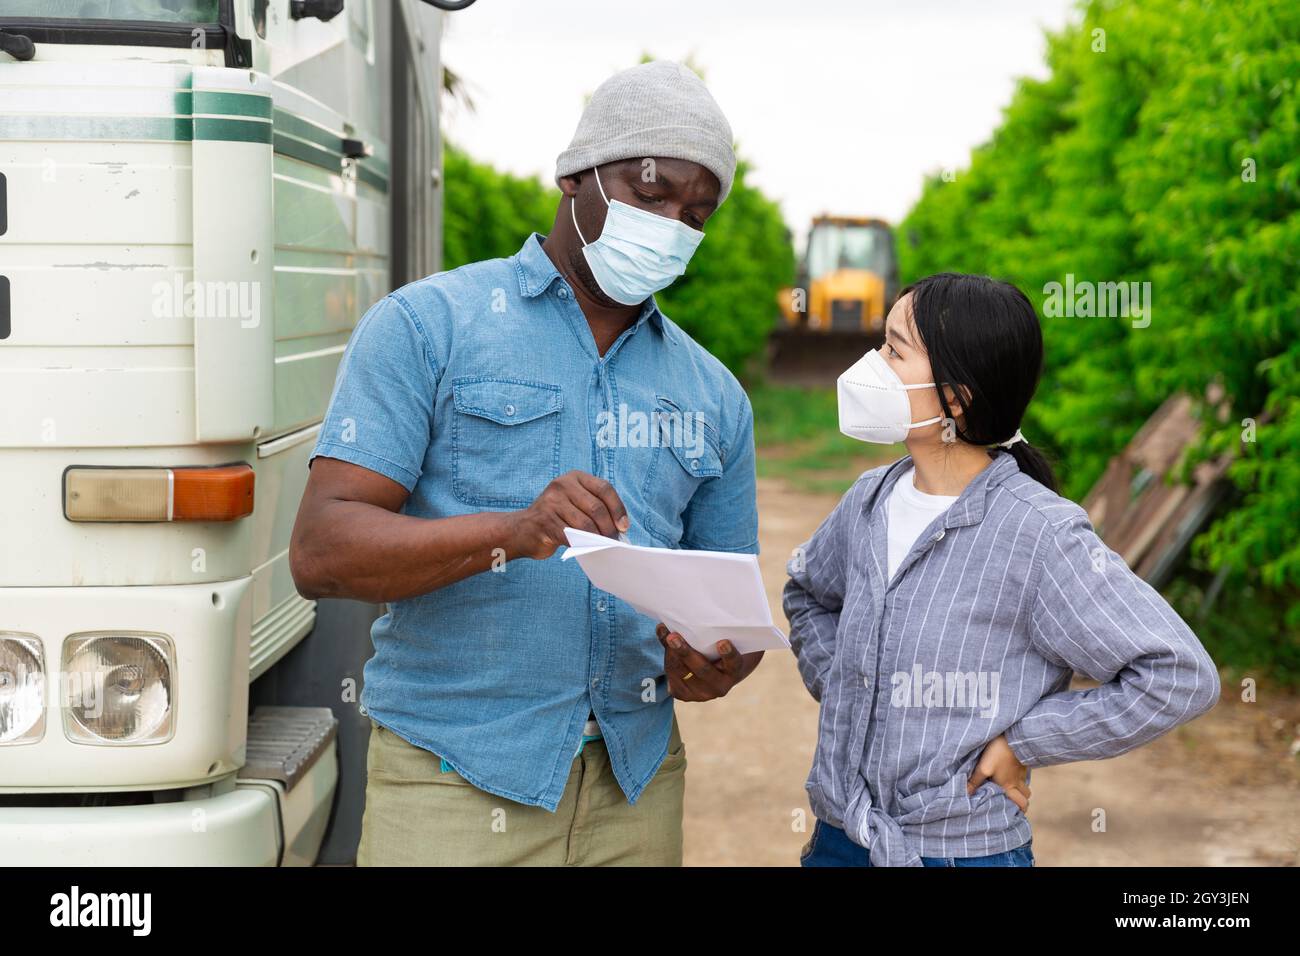 People near truck with mask Stock Photo